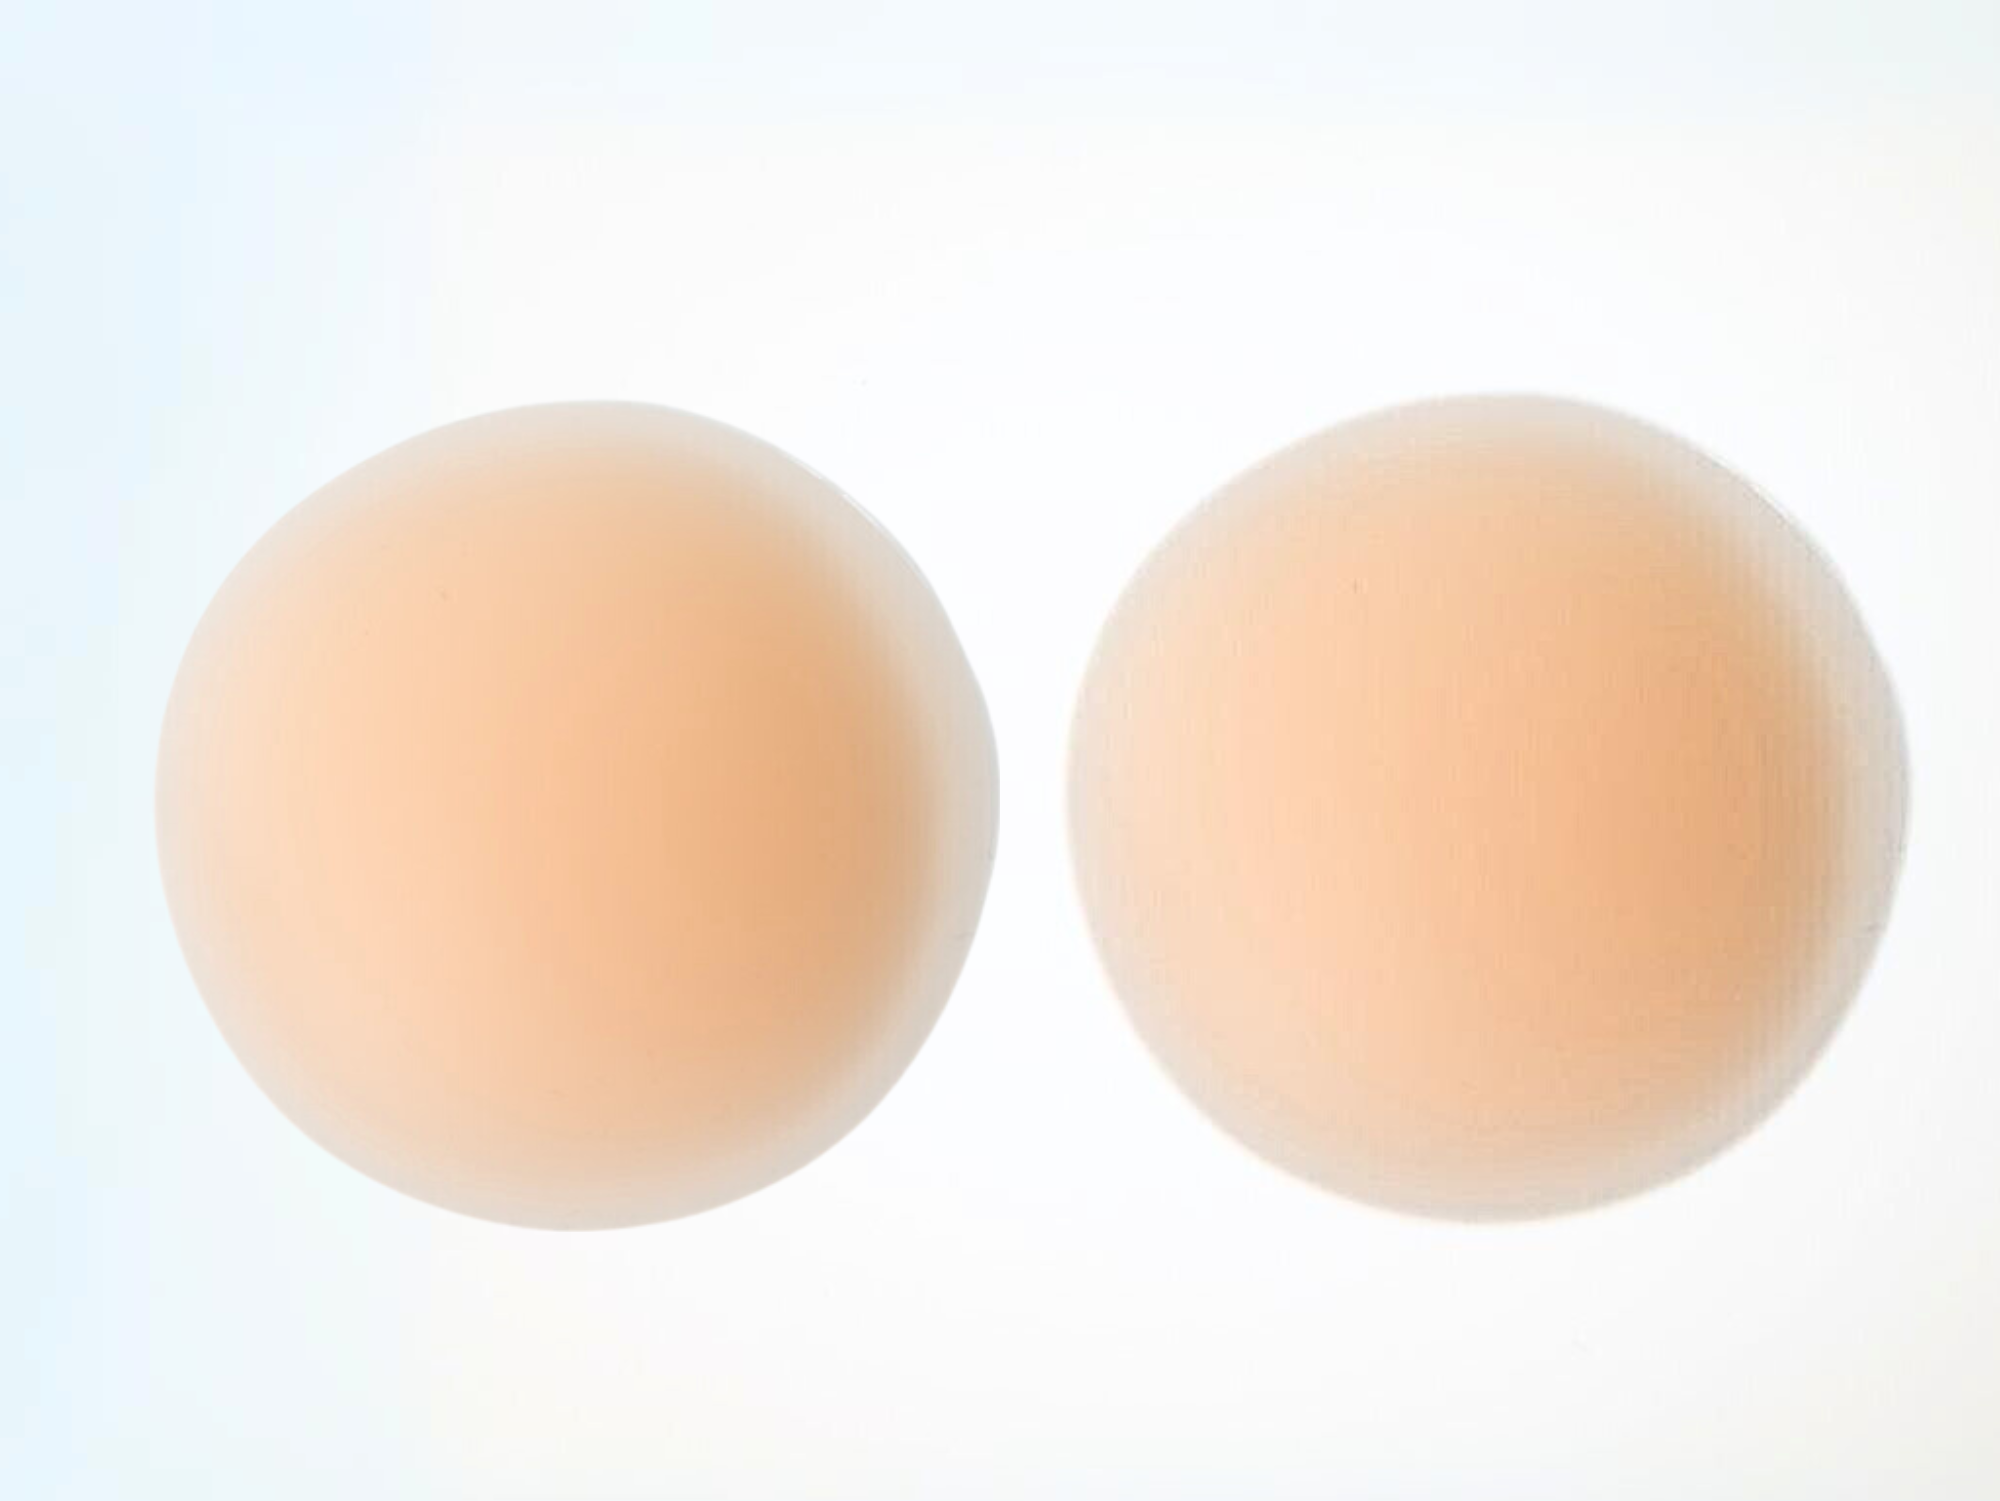 Very fair pinky flesh tone pasties similar to Maybelline foundation in "Fair Porcelain".